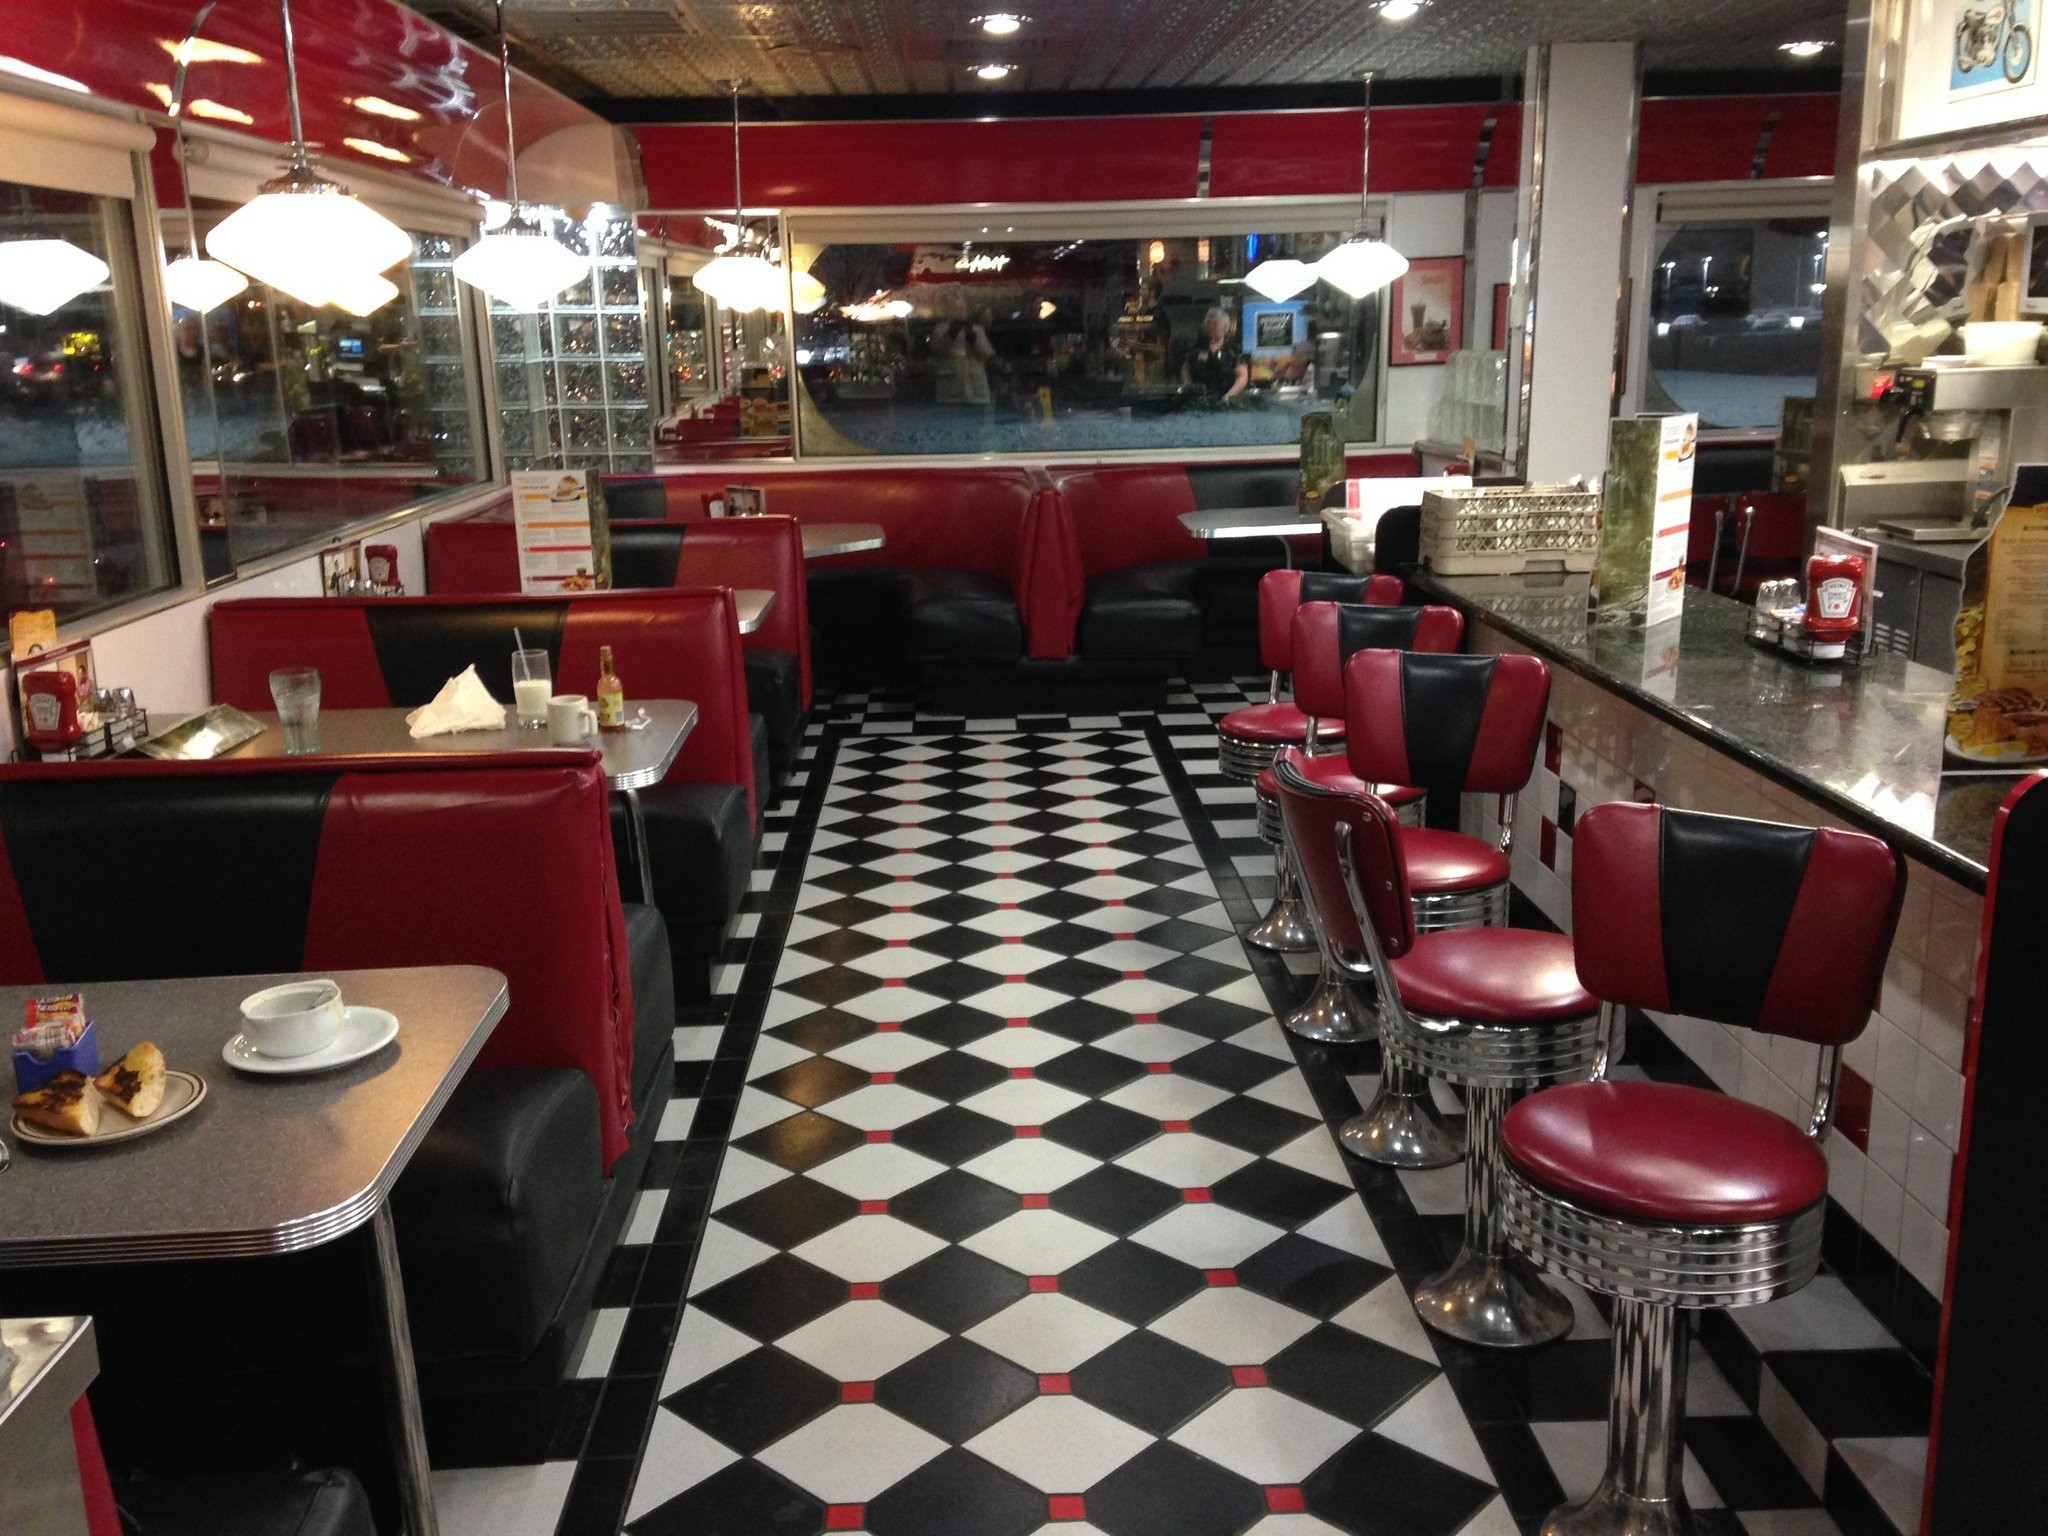 2048x1536 15 best Lot Inspiration - Diner images on Pinterest | 50s diner, Game  environment and Google search